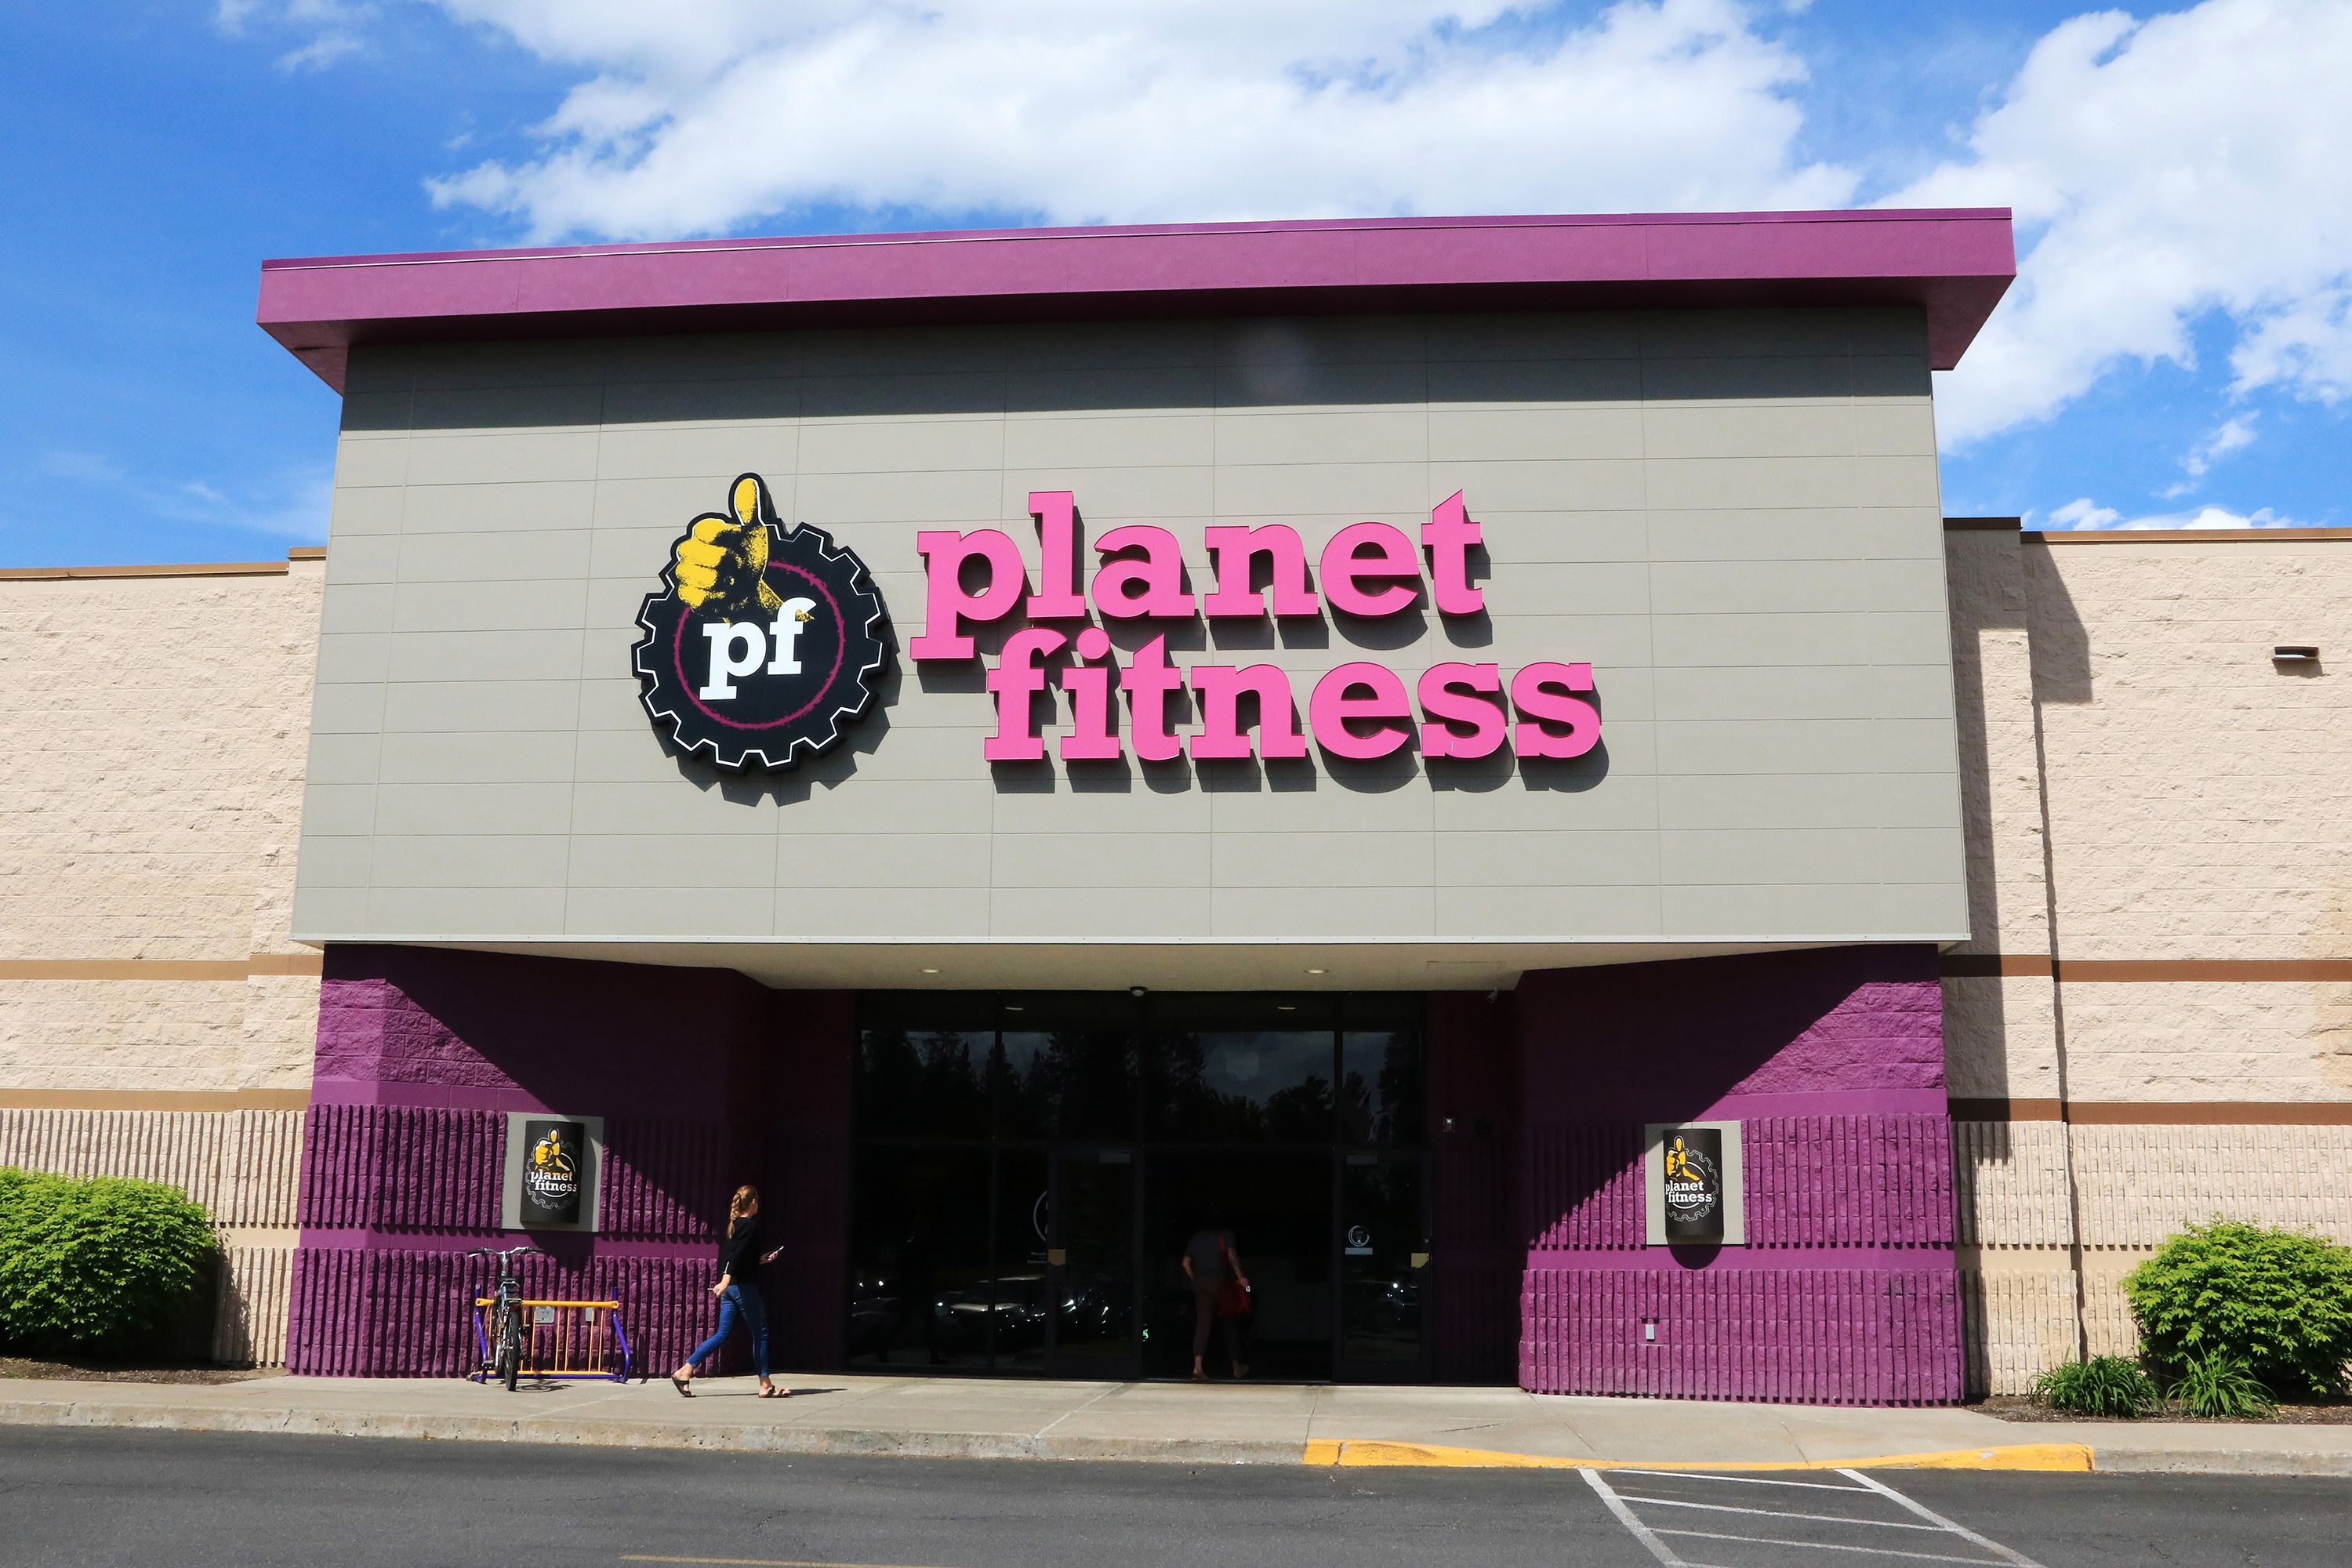 Teens Have Access To Free Planet Fitness Summer Pass in DMV